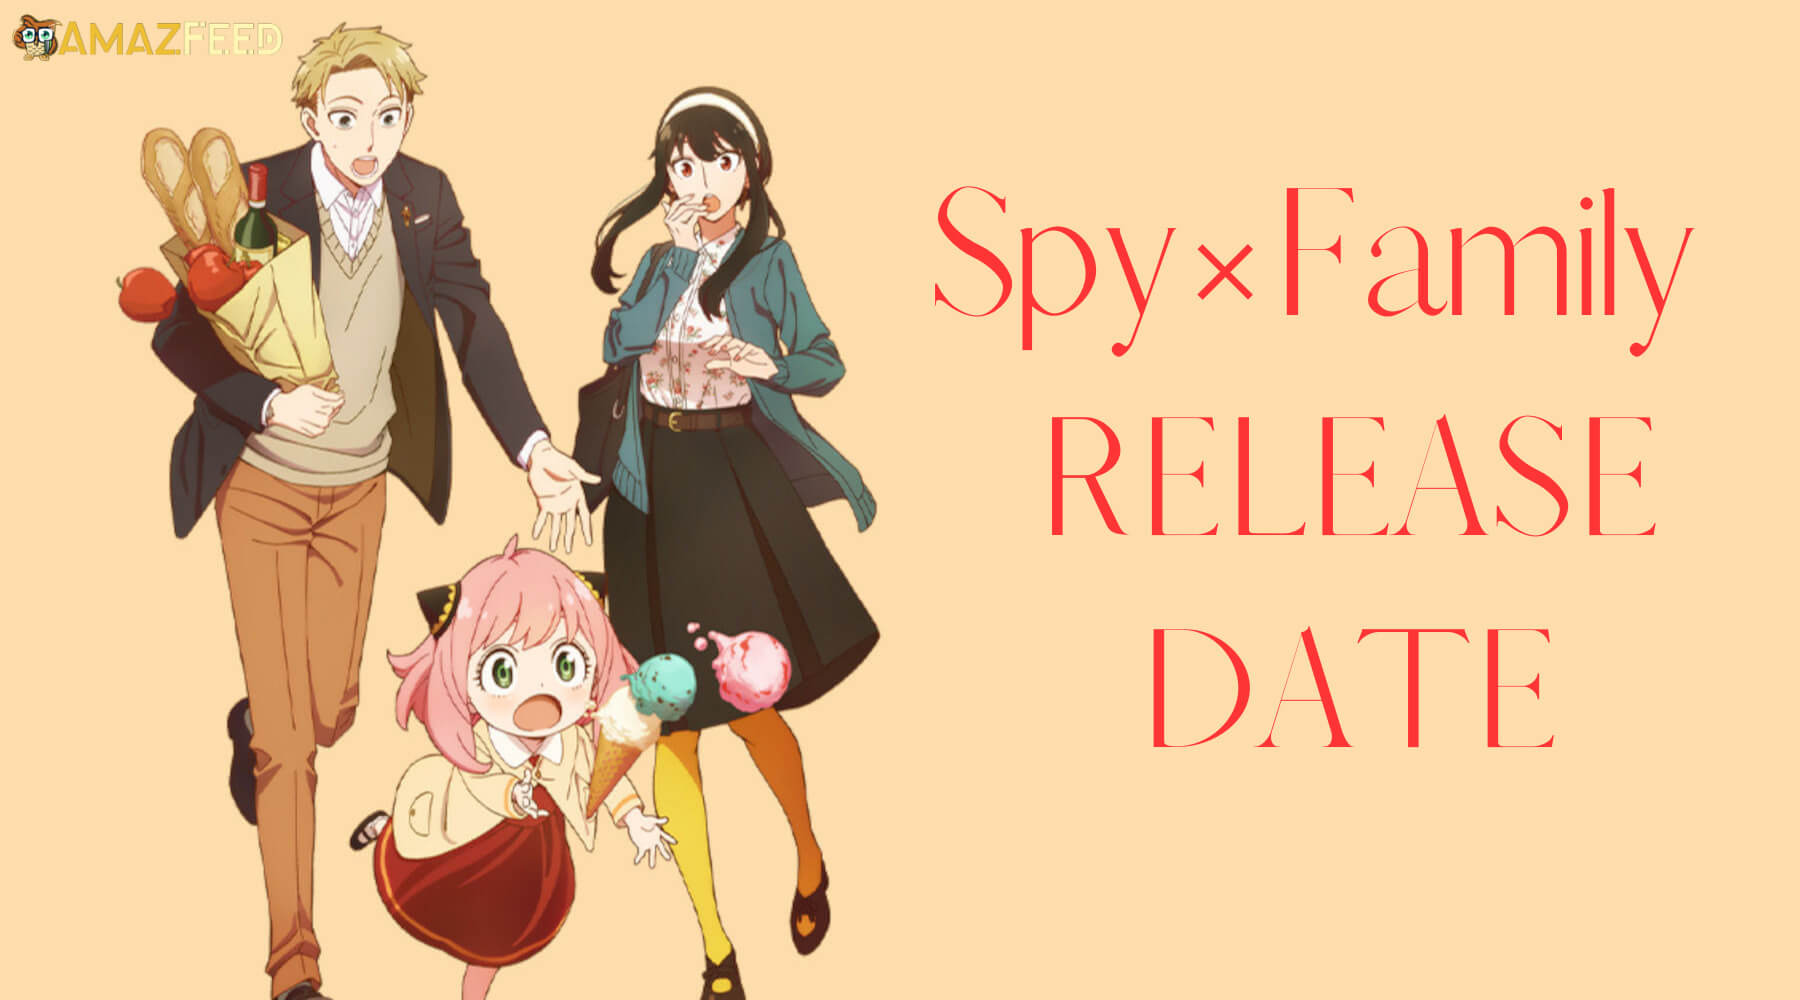 Spy×Family release date